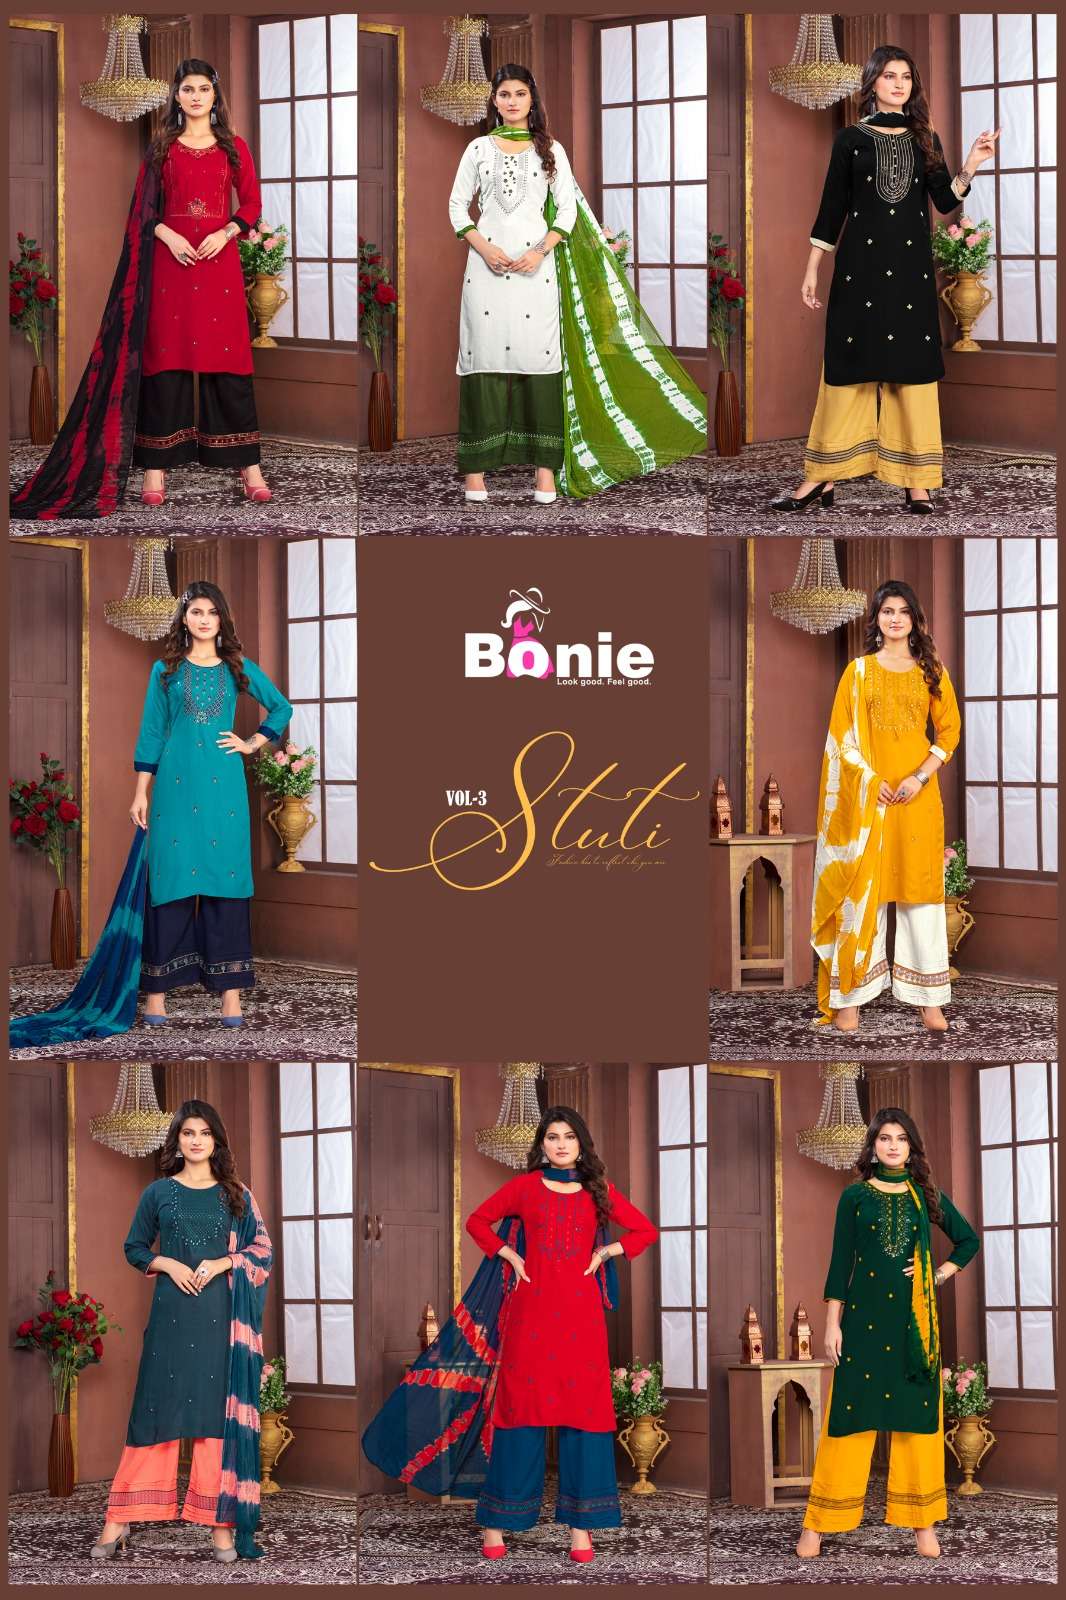 Stuti Vol-3 By Bonie 301 To 308 Series Designer Festive Suits Beautiful Fancy Stylish Colorful Party Wear & Occasional Wear Heavy Rayon Dresses At Wholesale Price